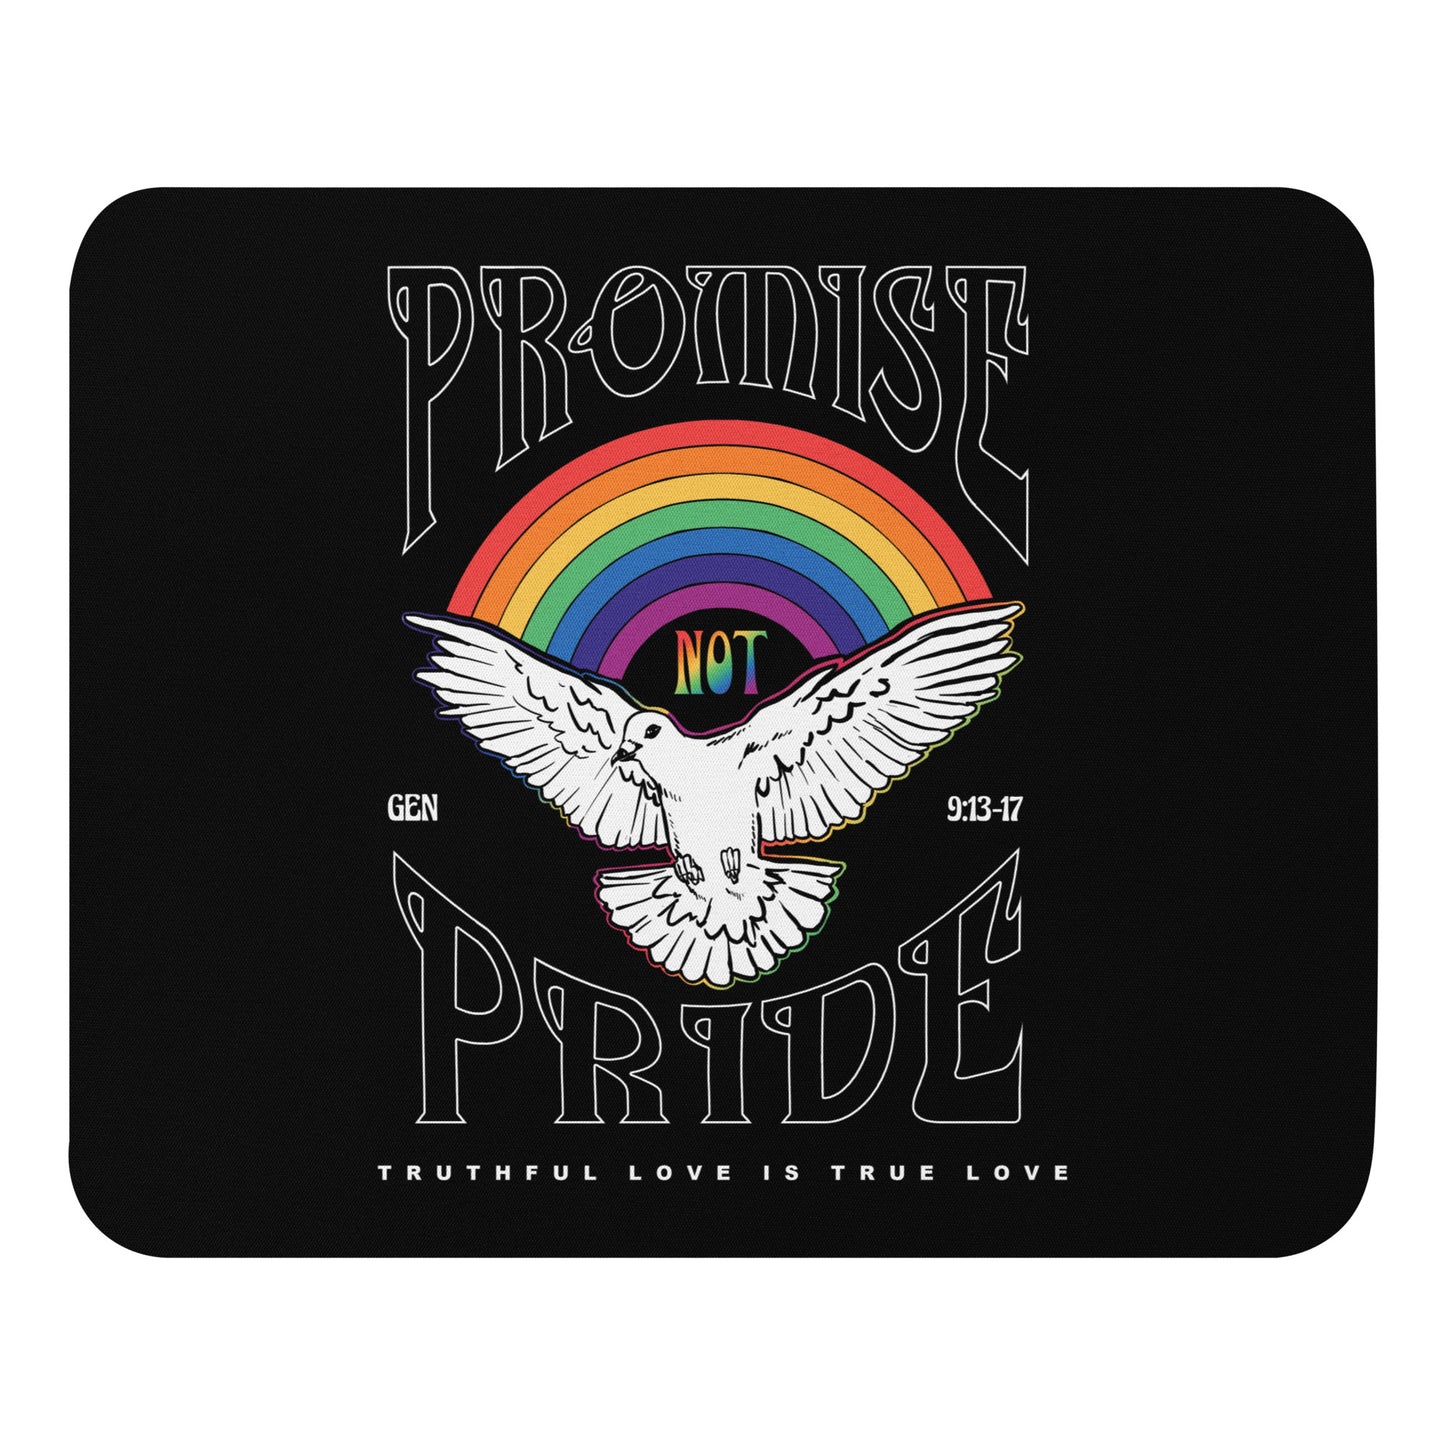 "Promise NOT Pride." - Mouse pad